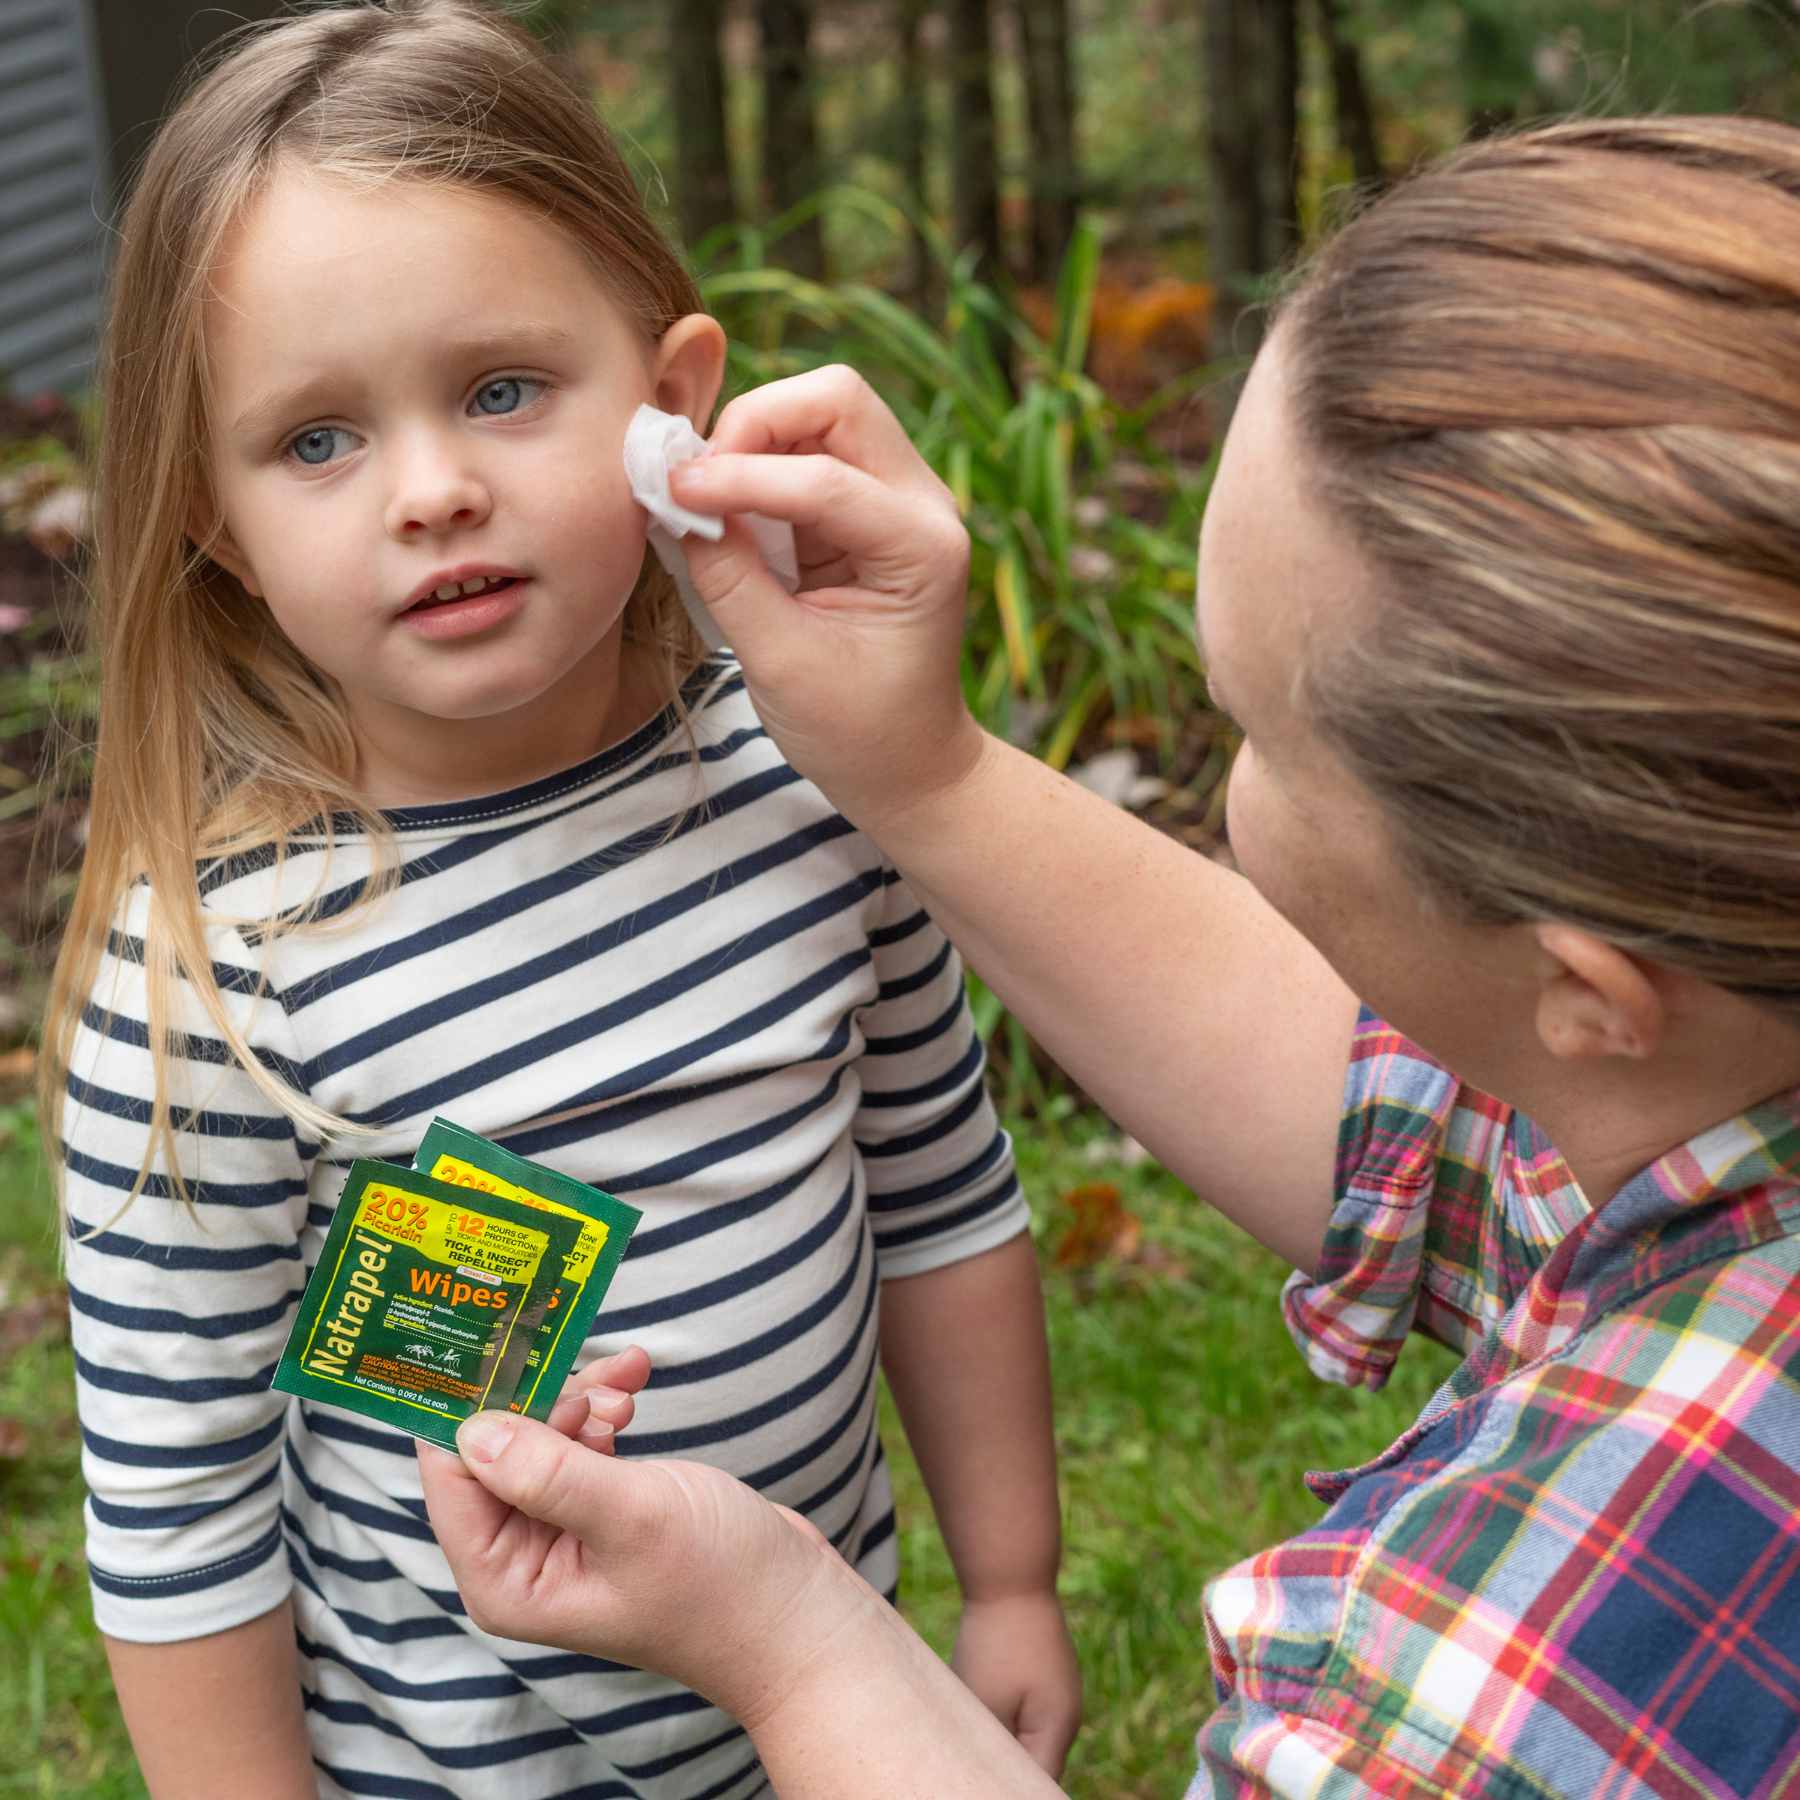 Woman applying Natrapel Picaridin Insect Repellent Wipes to child's face